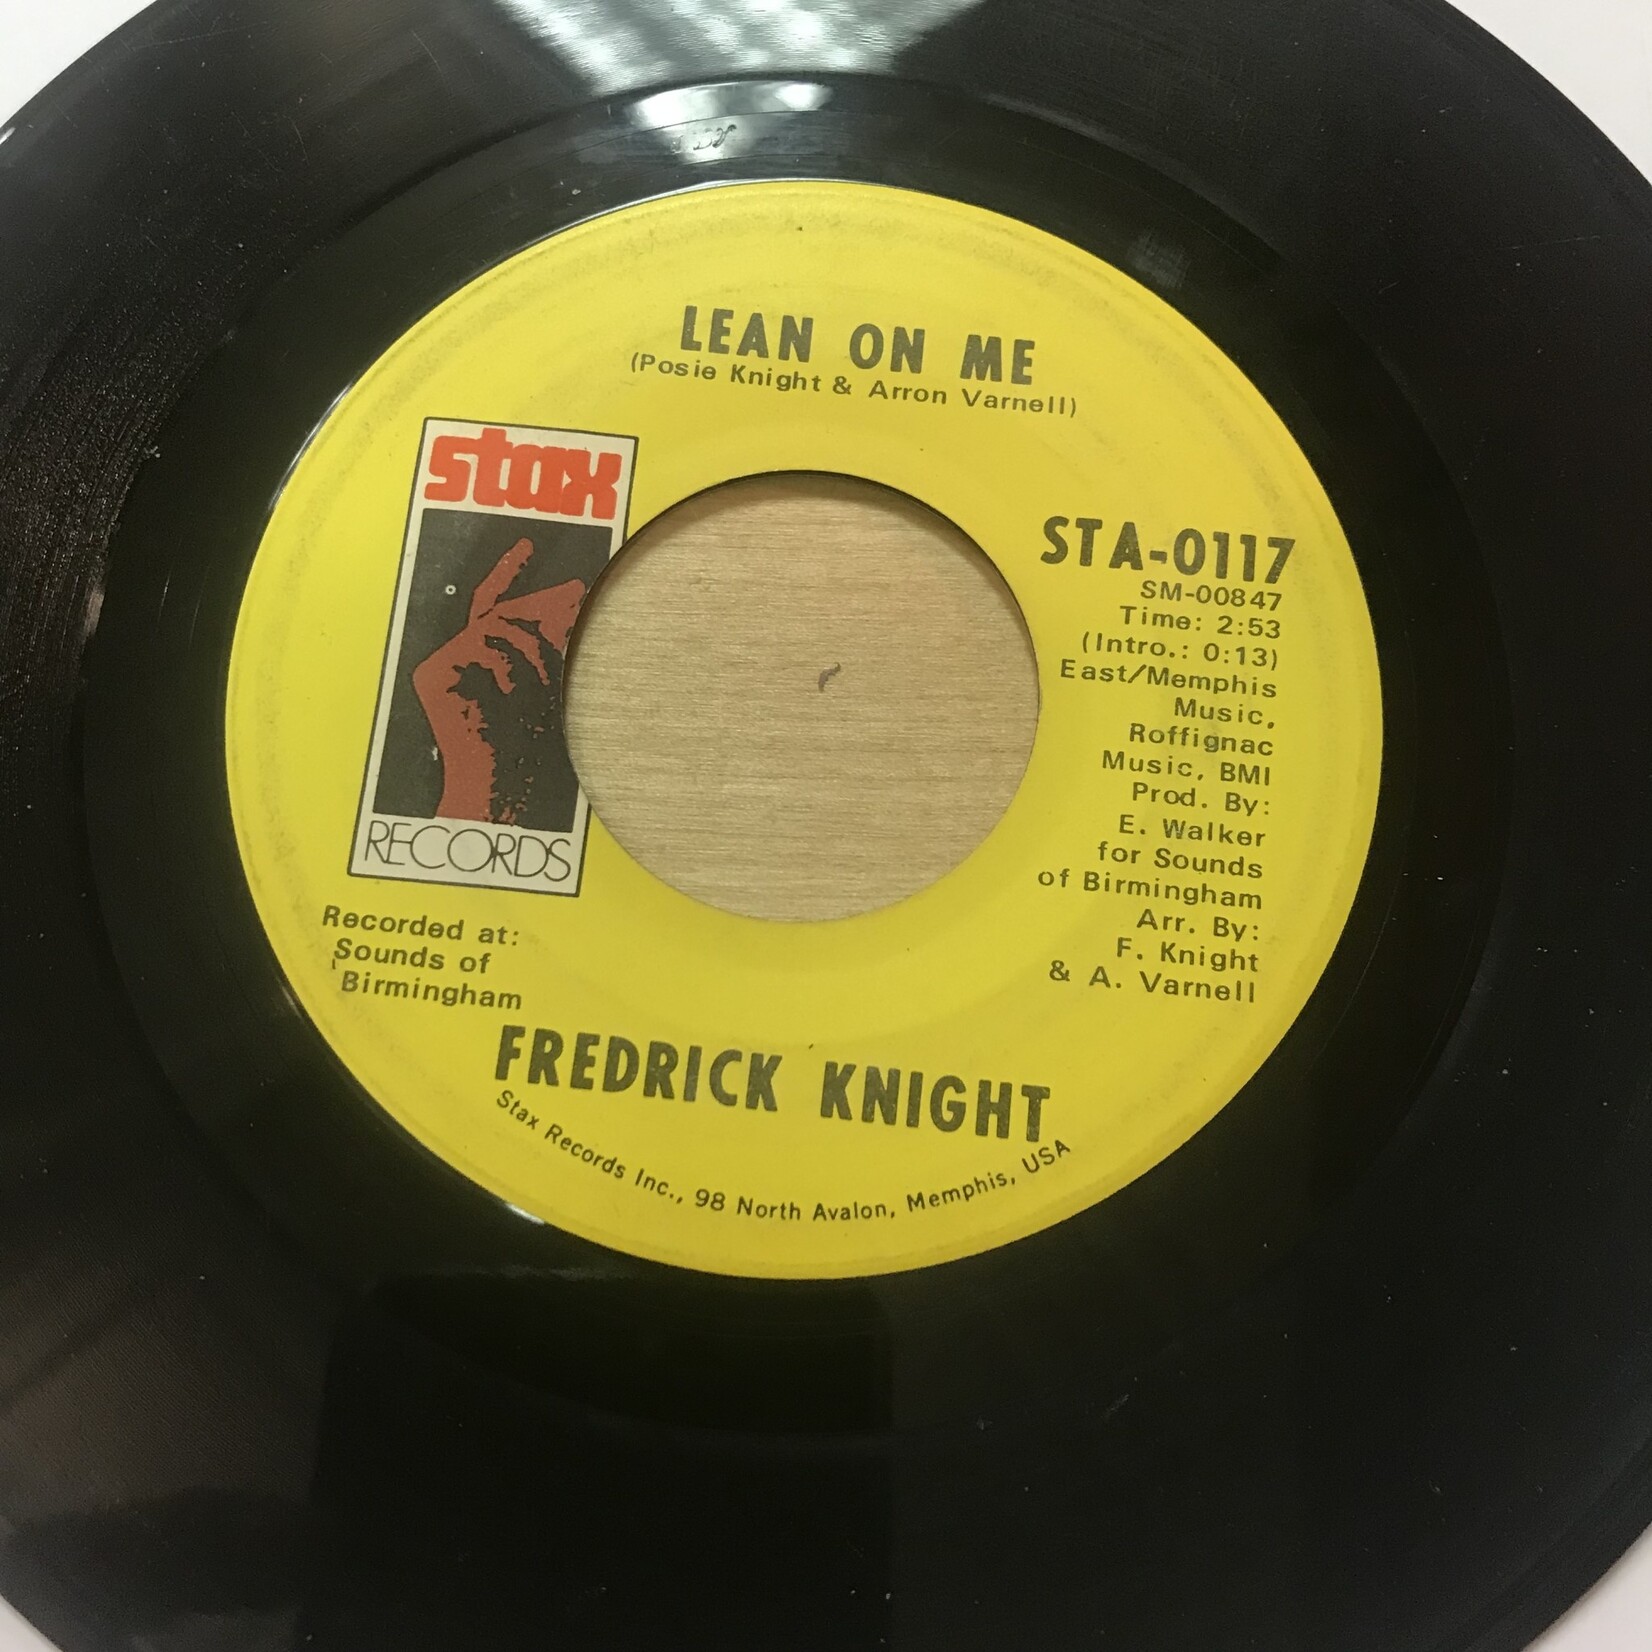 Fredrick Knight - Lean On Me / I’ve Been Lonely For So Long - STA 0117 - Vinyl 45 (USED)